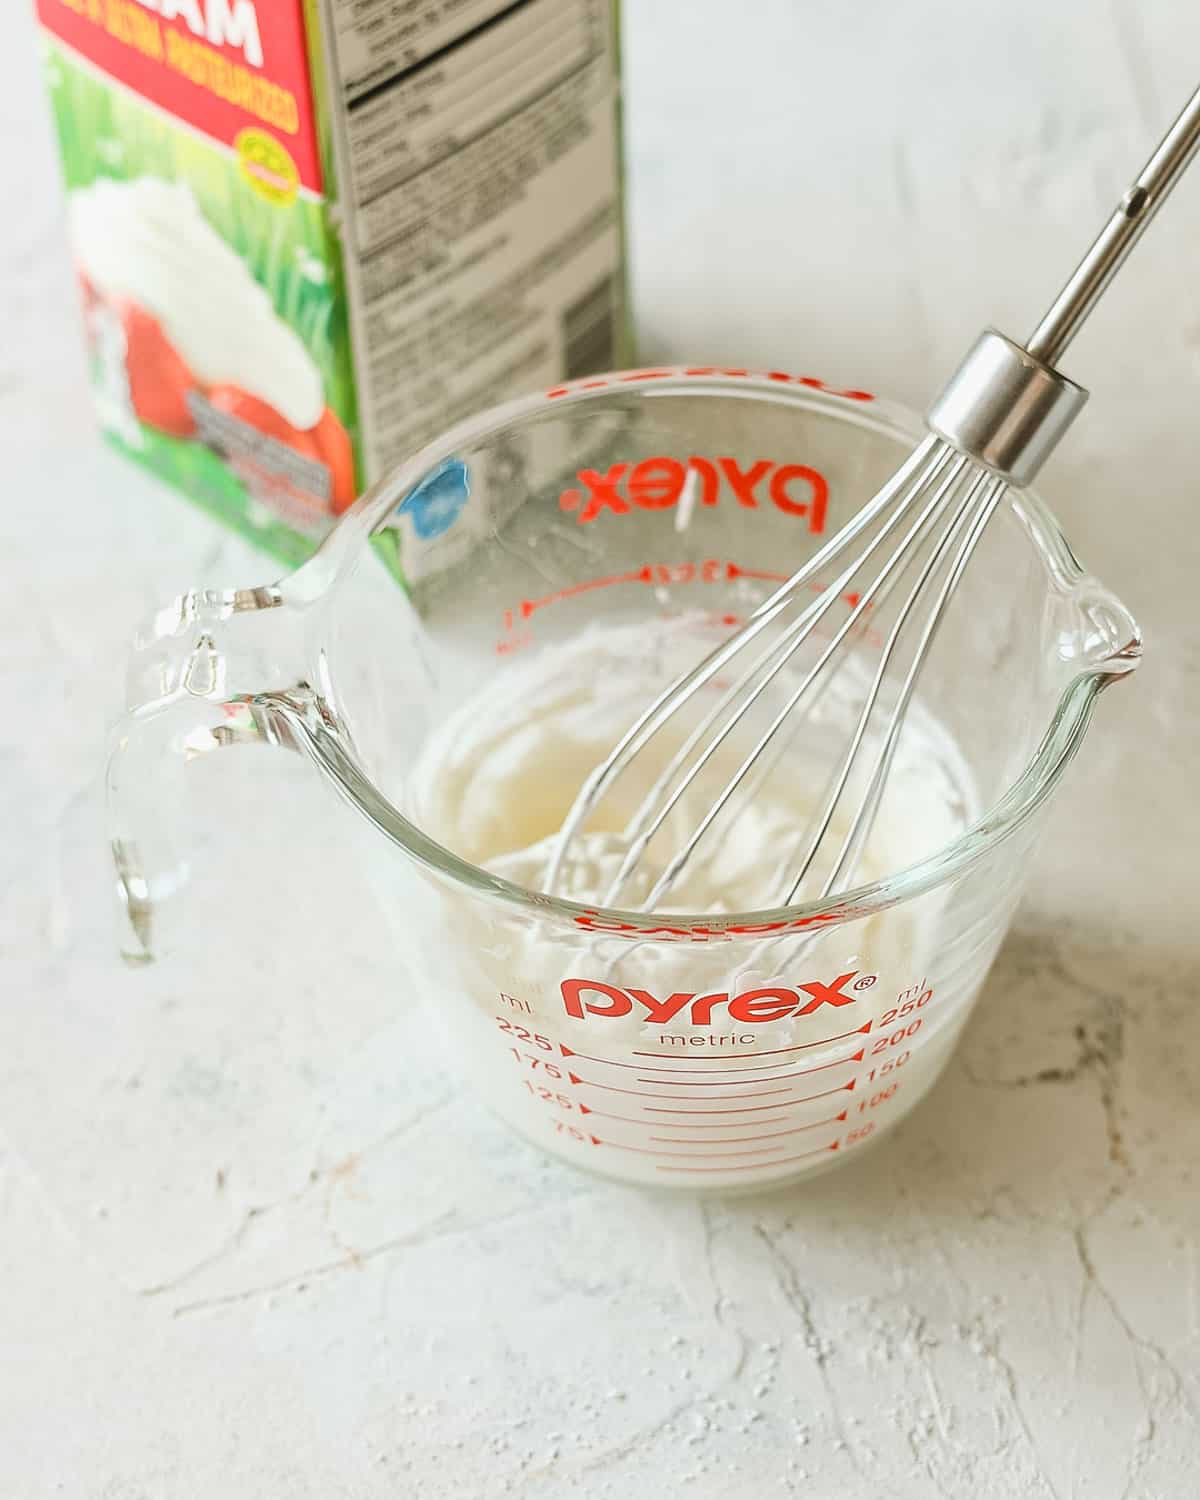 A small whisk in a measuring cup of whipped cream.